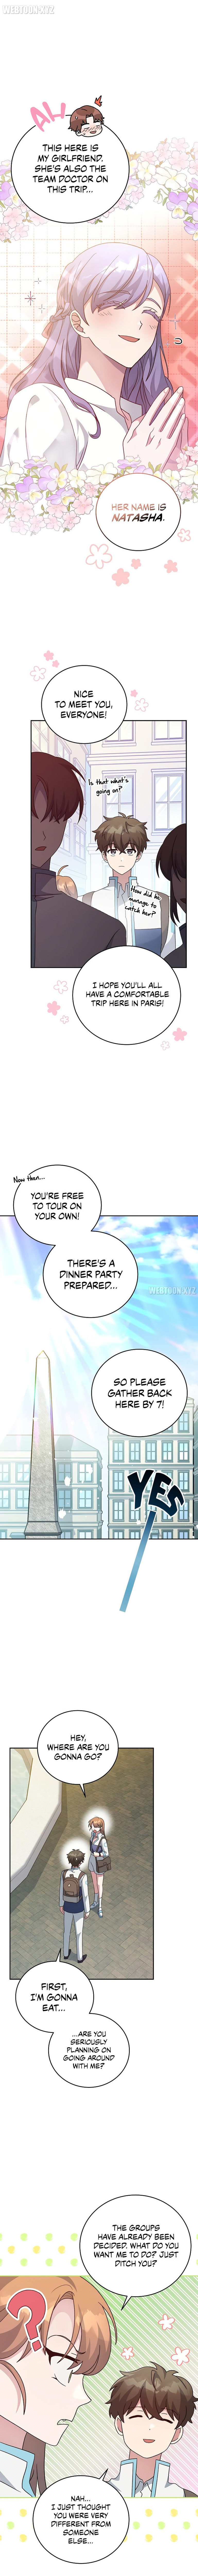 the-novels-extra-remake-chap-39-2